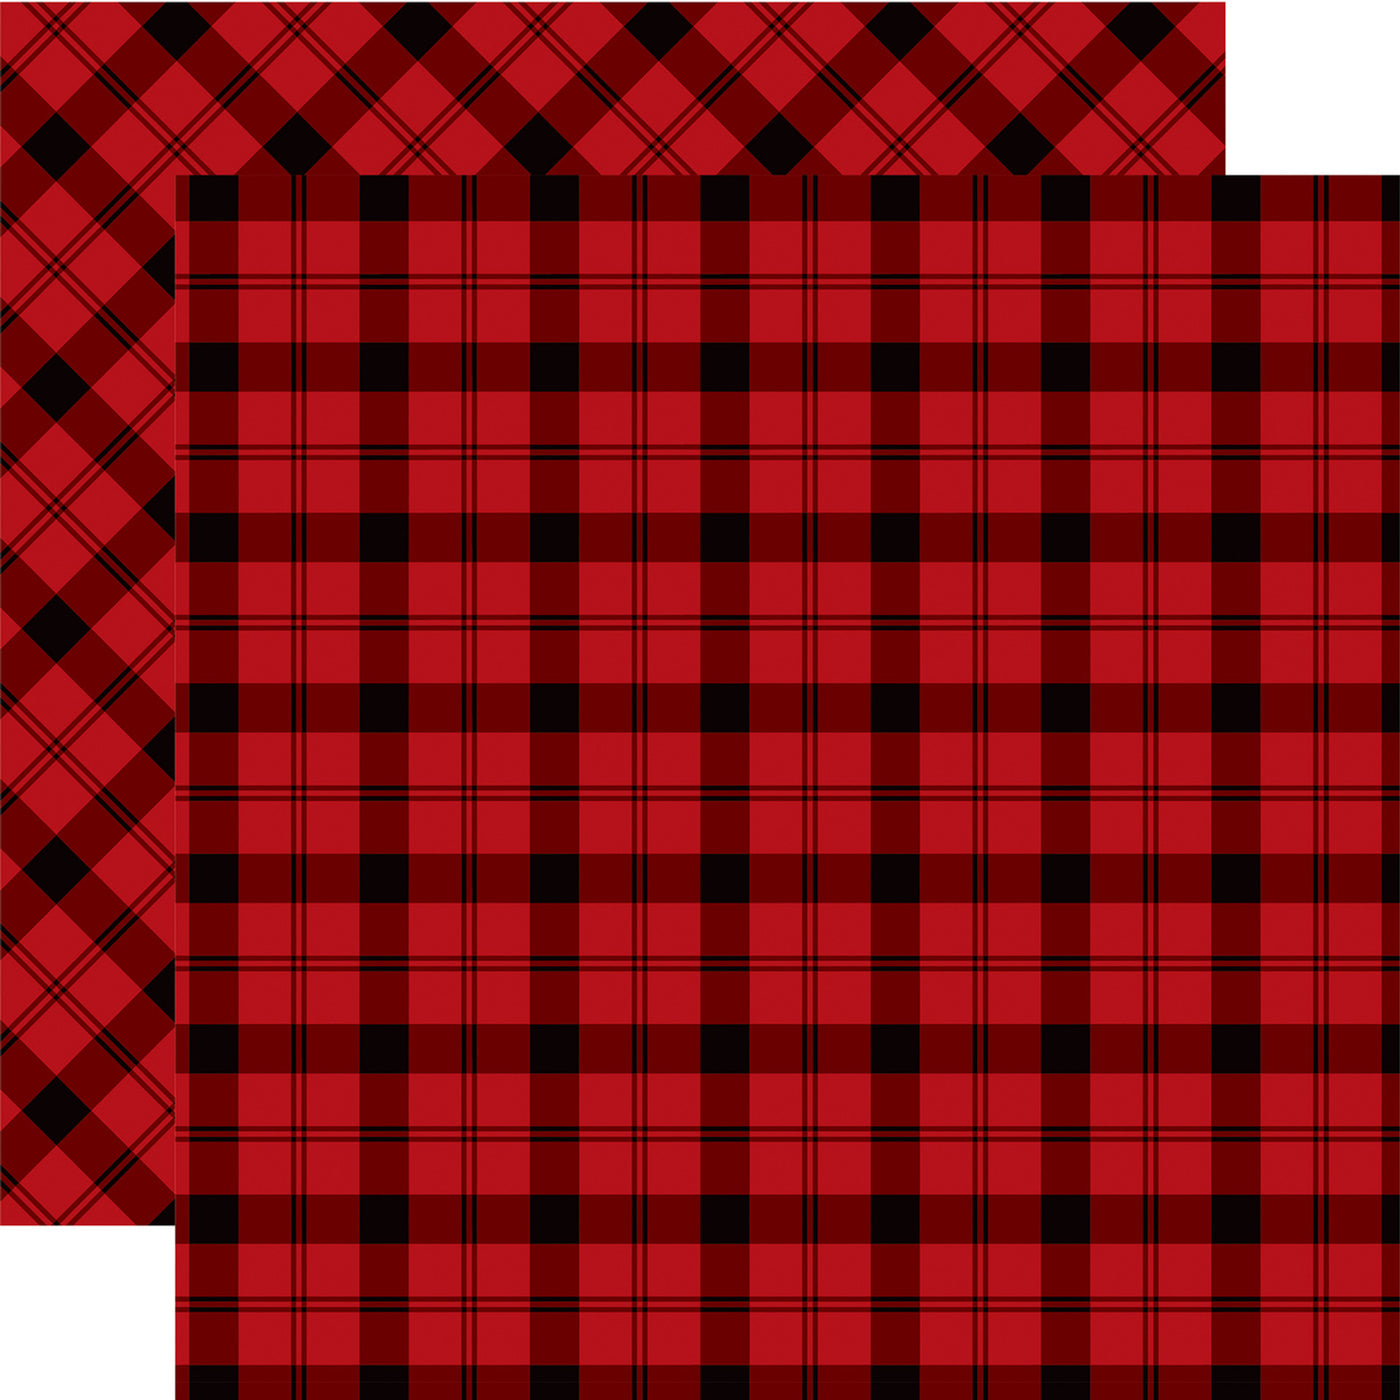 Double-sided 12x12 cardstock sheets of Windsor Plaid. Each side is different but coordinated. 80 lb. Felt texture. 